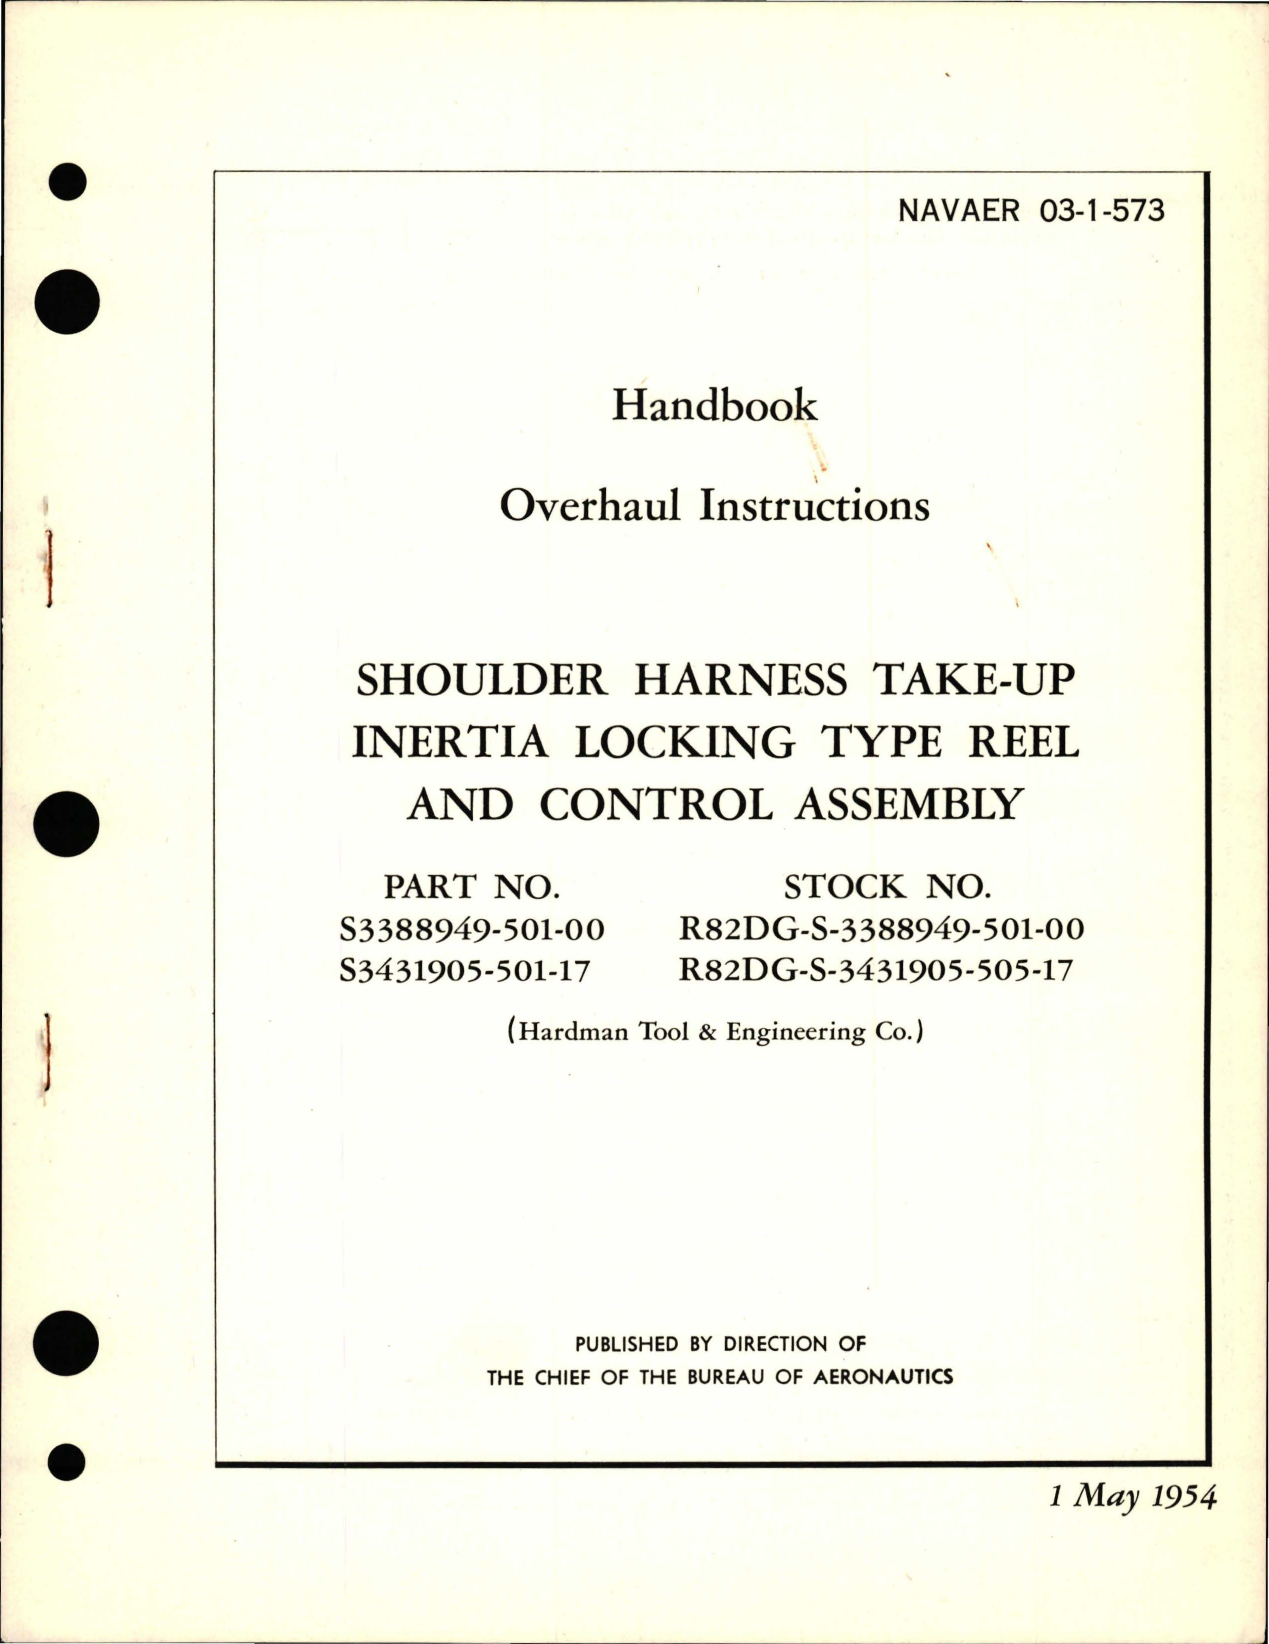 Sample page 1 from AirCorps Library document: Overhaul Instructions for Shoulder Harness Take-Up Inertia Locking Type Reel and Control Assembly - Parts S3388949-501-00 and S3431905-501-17 